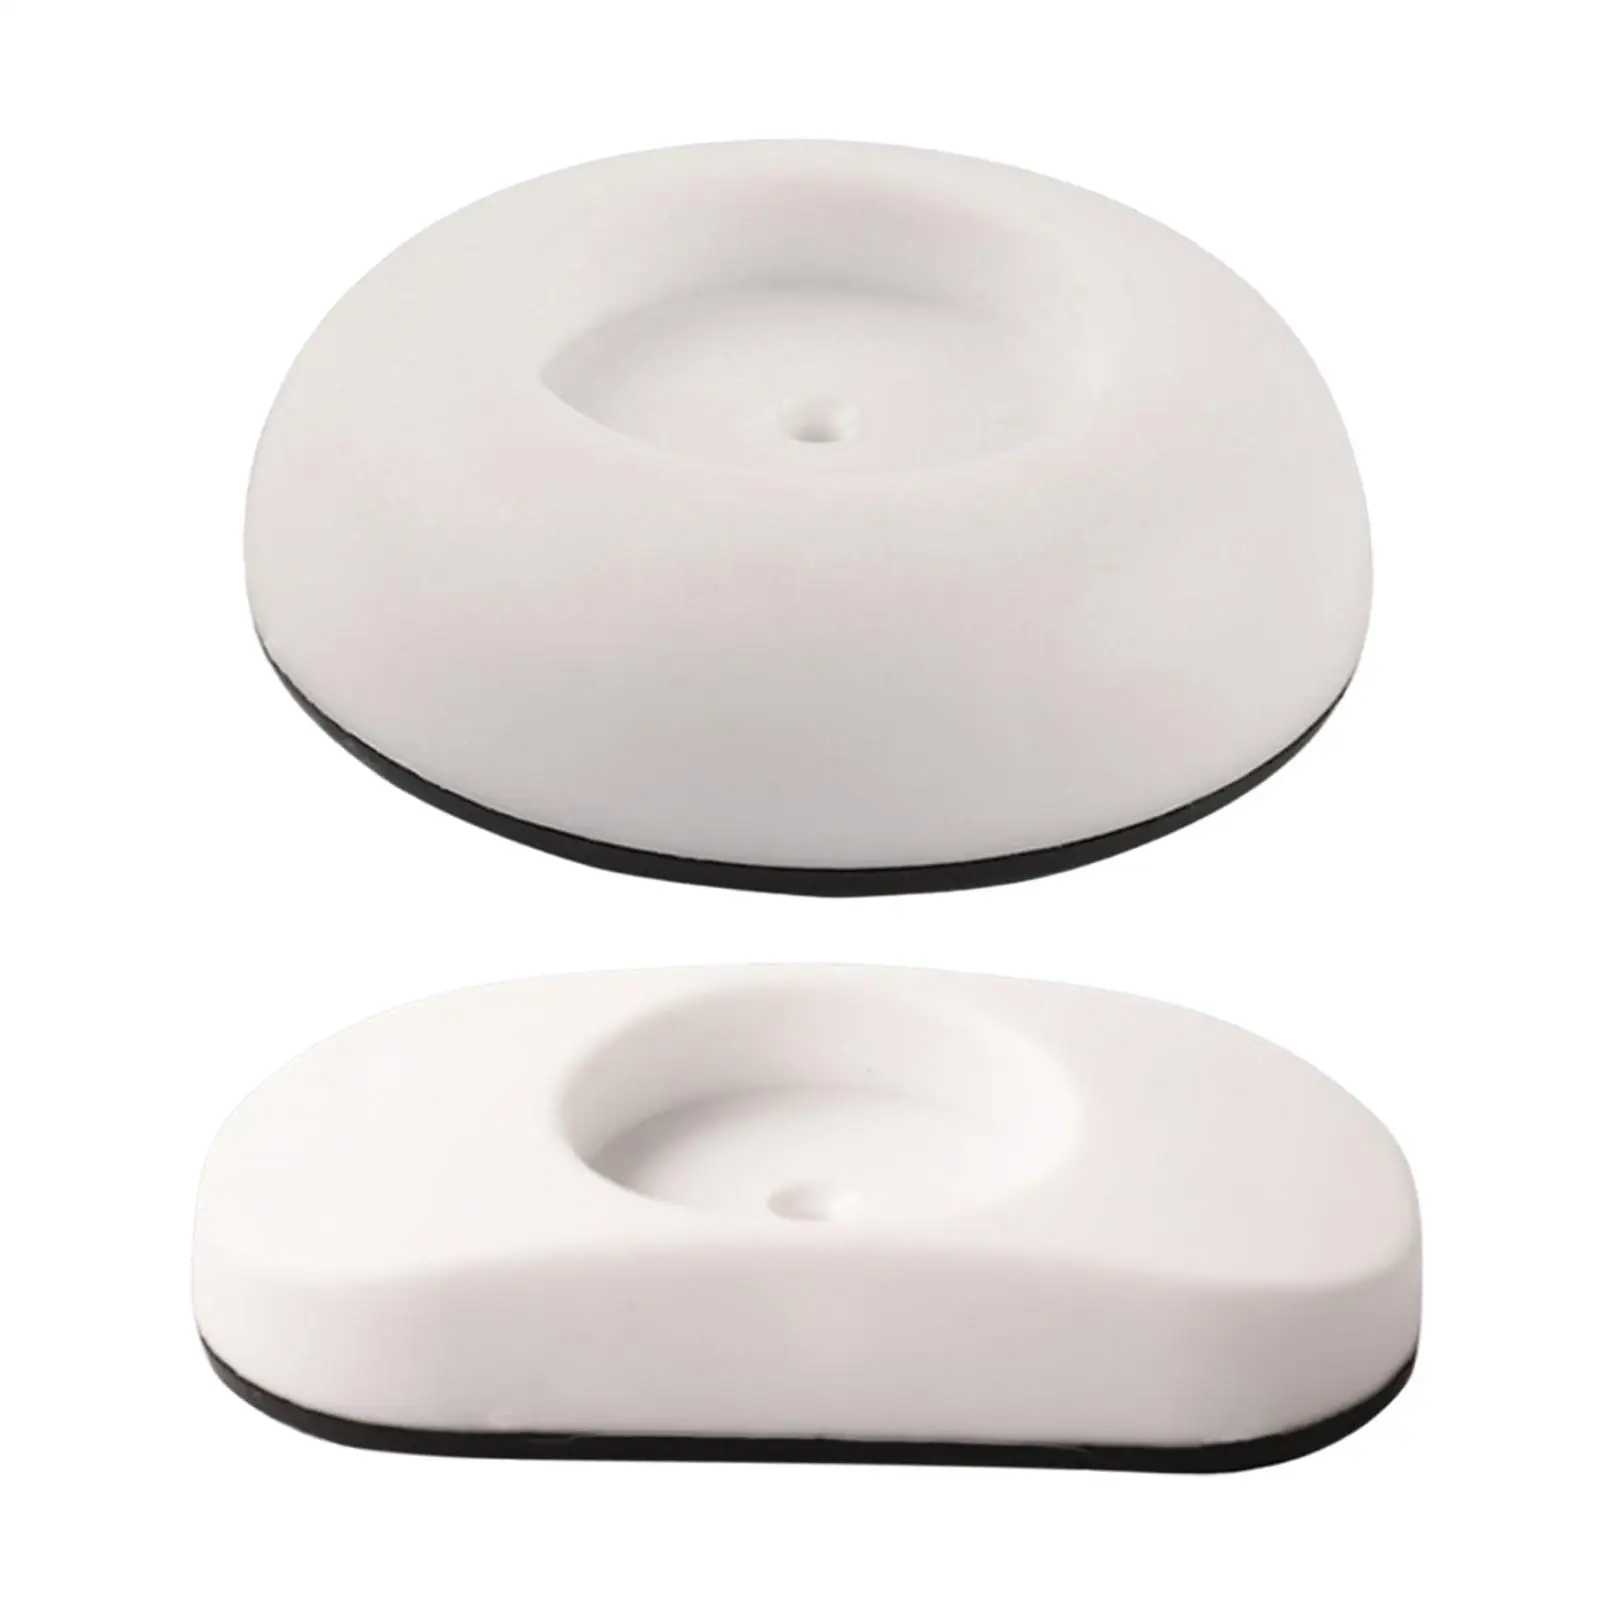 Small Gate Wall Protector Wall Cups Protect Walls Gates Wall Pads Cup Pads for Stair Gate Indoor Gate Wall